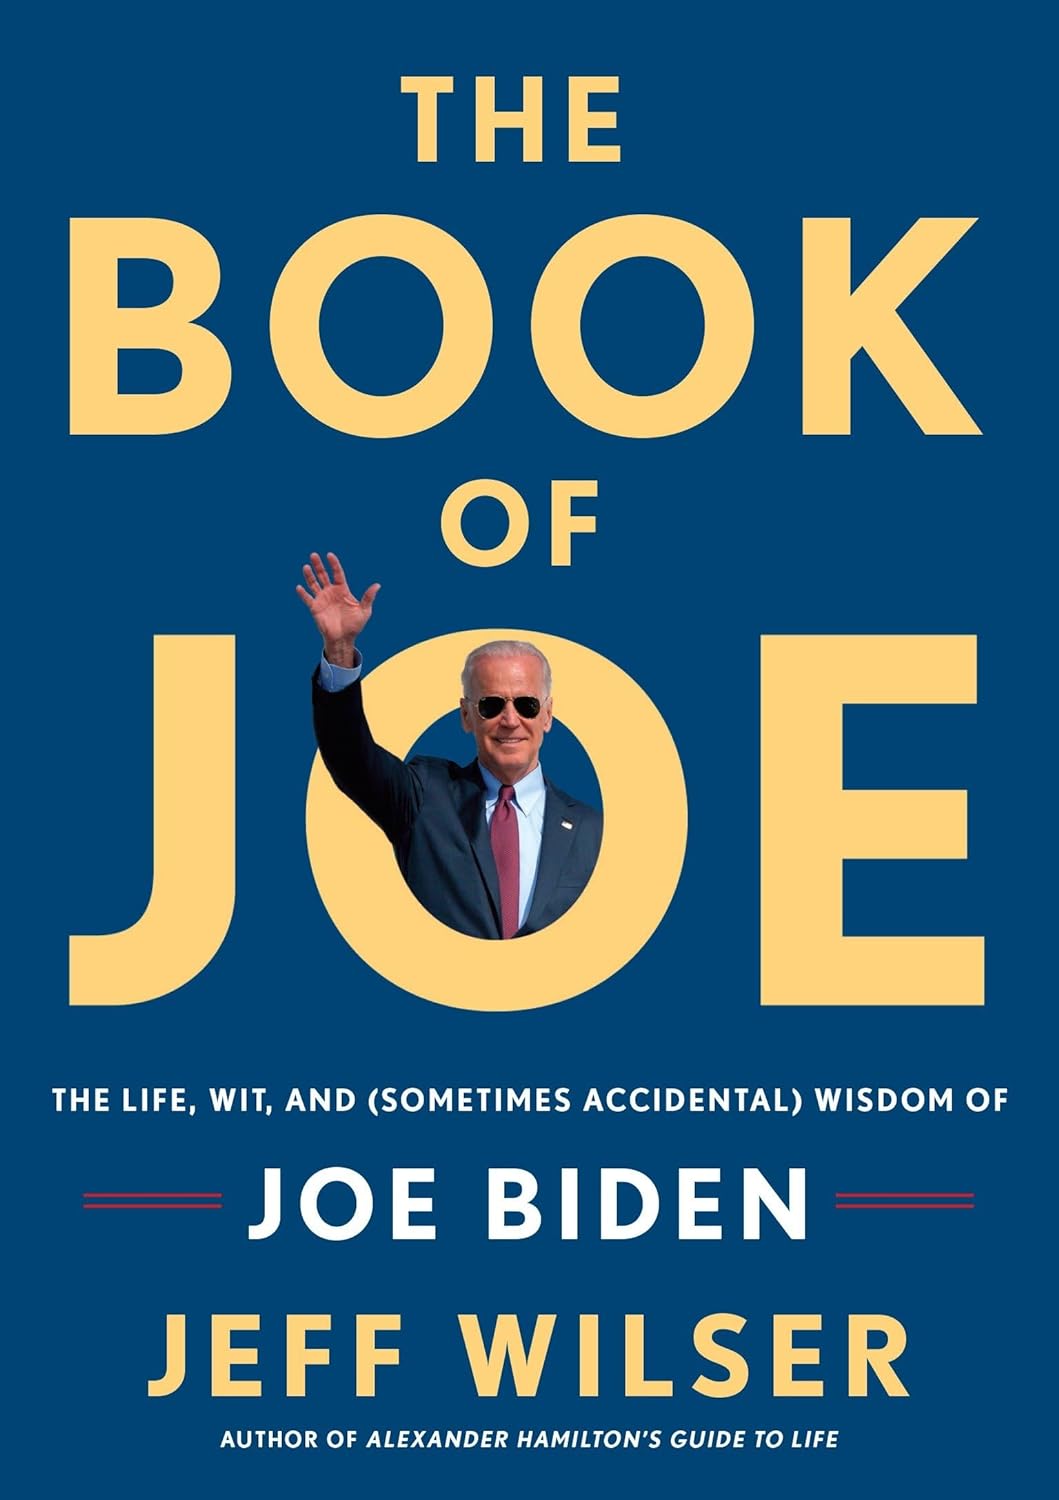 The Book of Joe: The Life, Wit, and (Sometimes Accidental) Wisdom of Joe Biden Hardcover – October 24, 2017